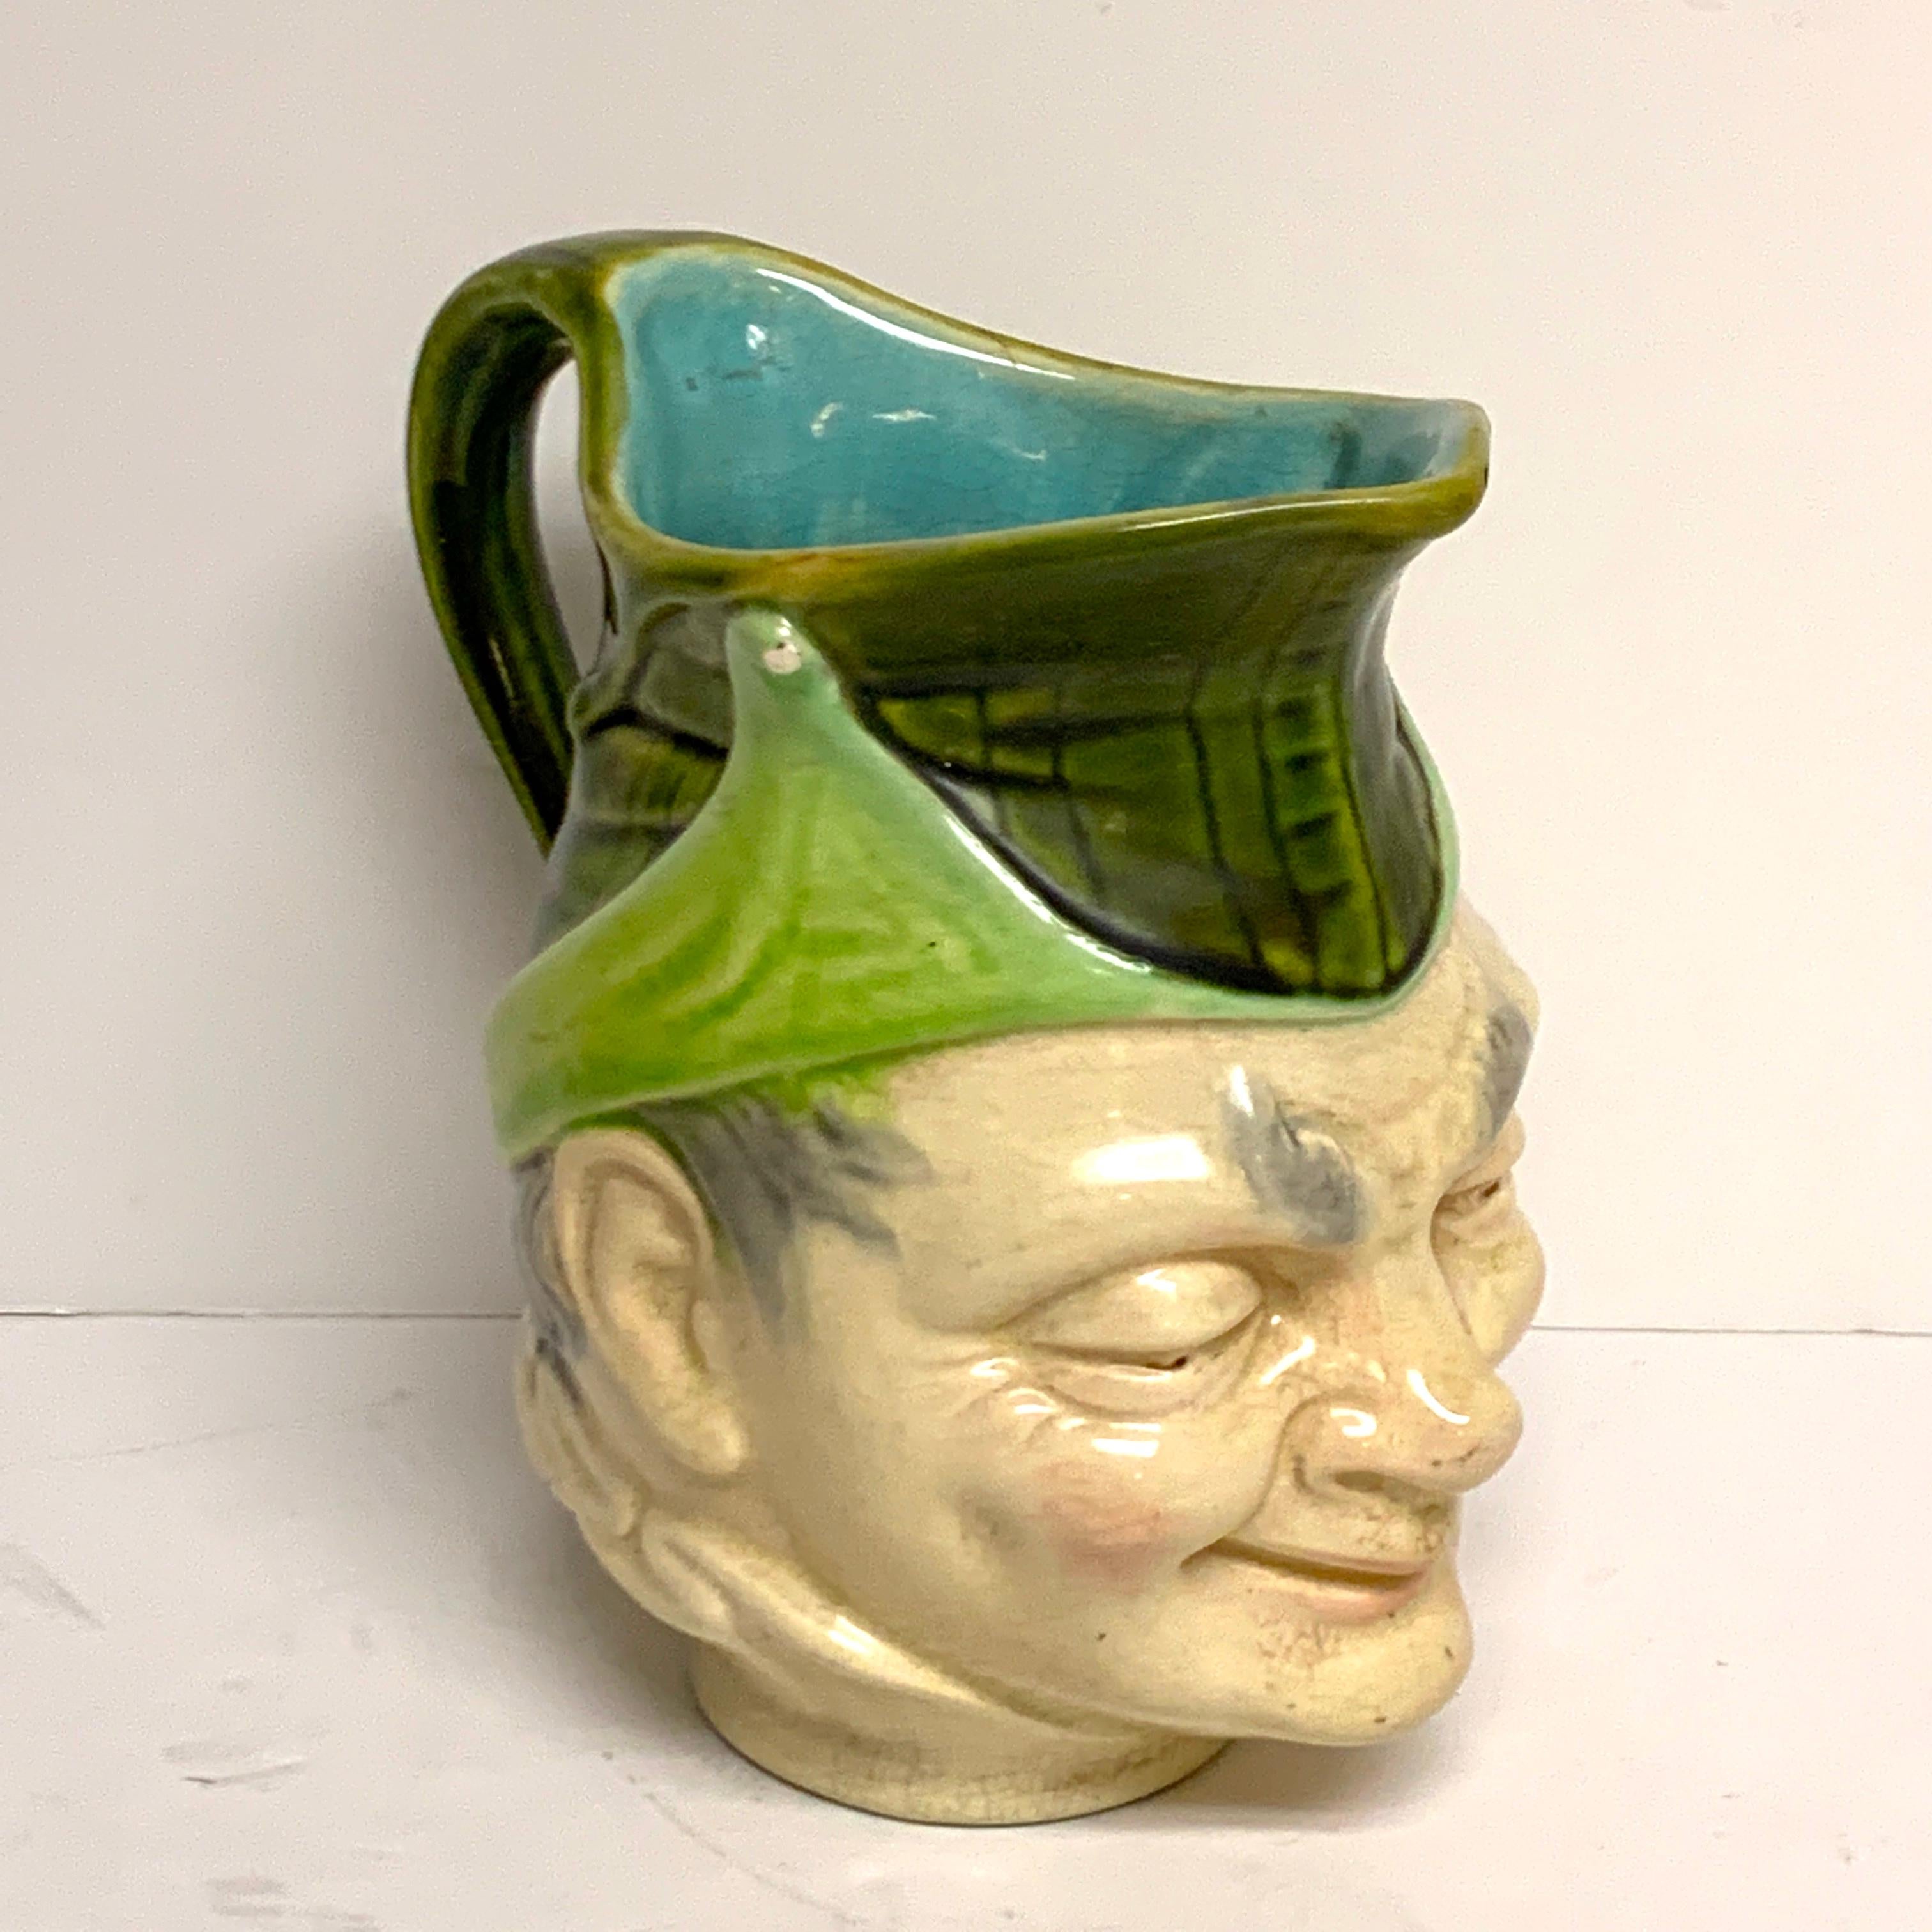 19th century Sarreguemines Majolica character pitcher, of typical form expressive man with hat, stamped Sarreguemines.